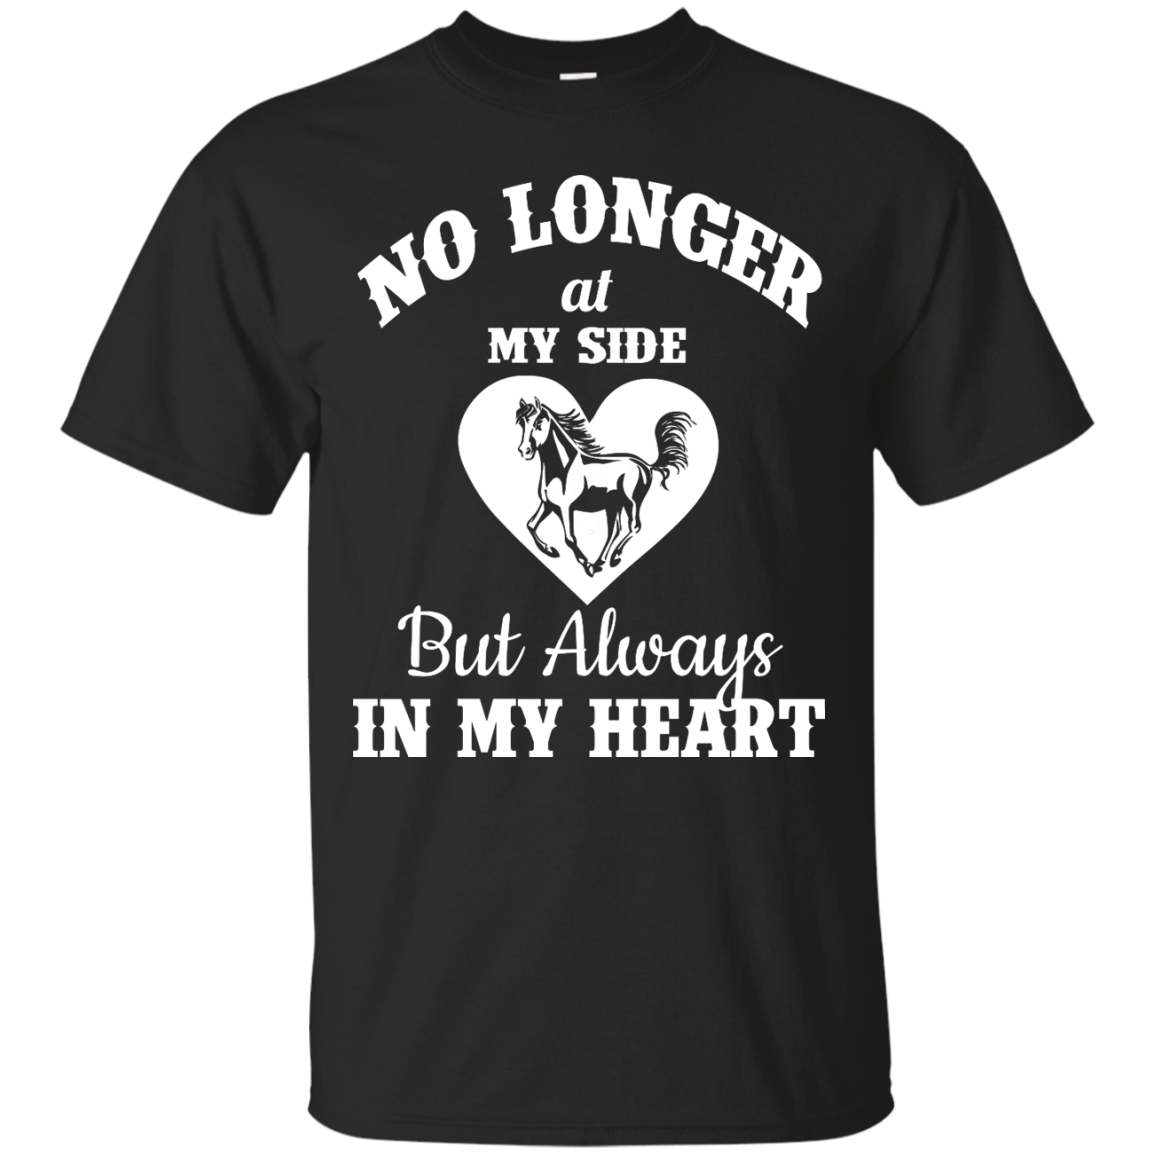 My Horse: No Longer At My Side But Always In My Heart shirt, sweater, tank